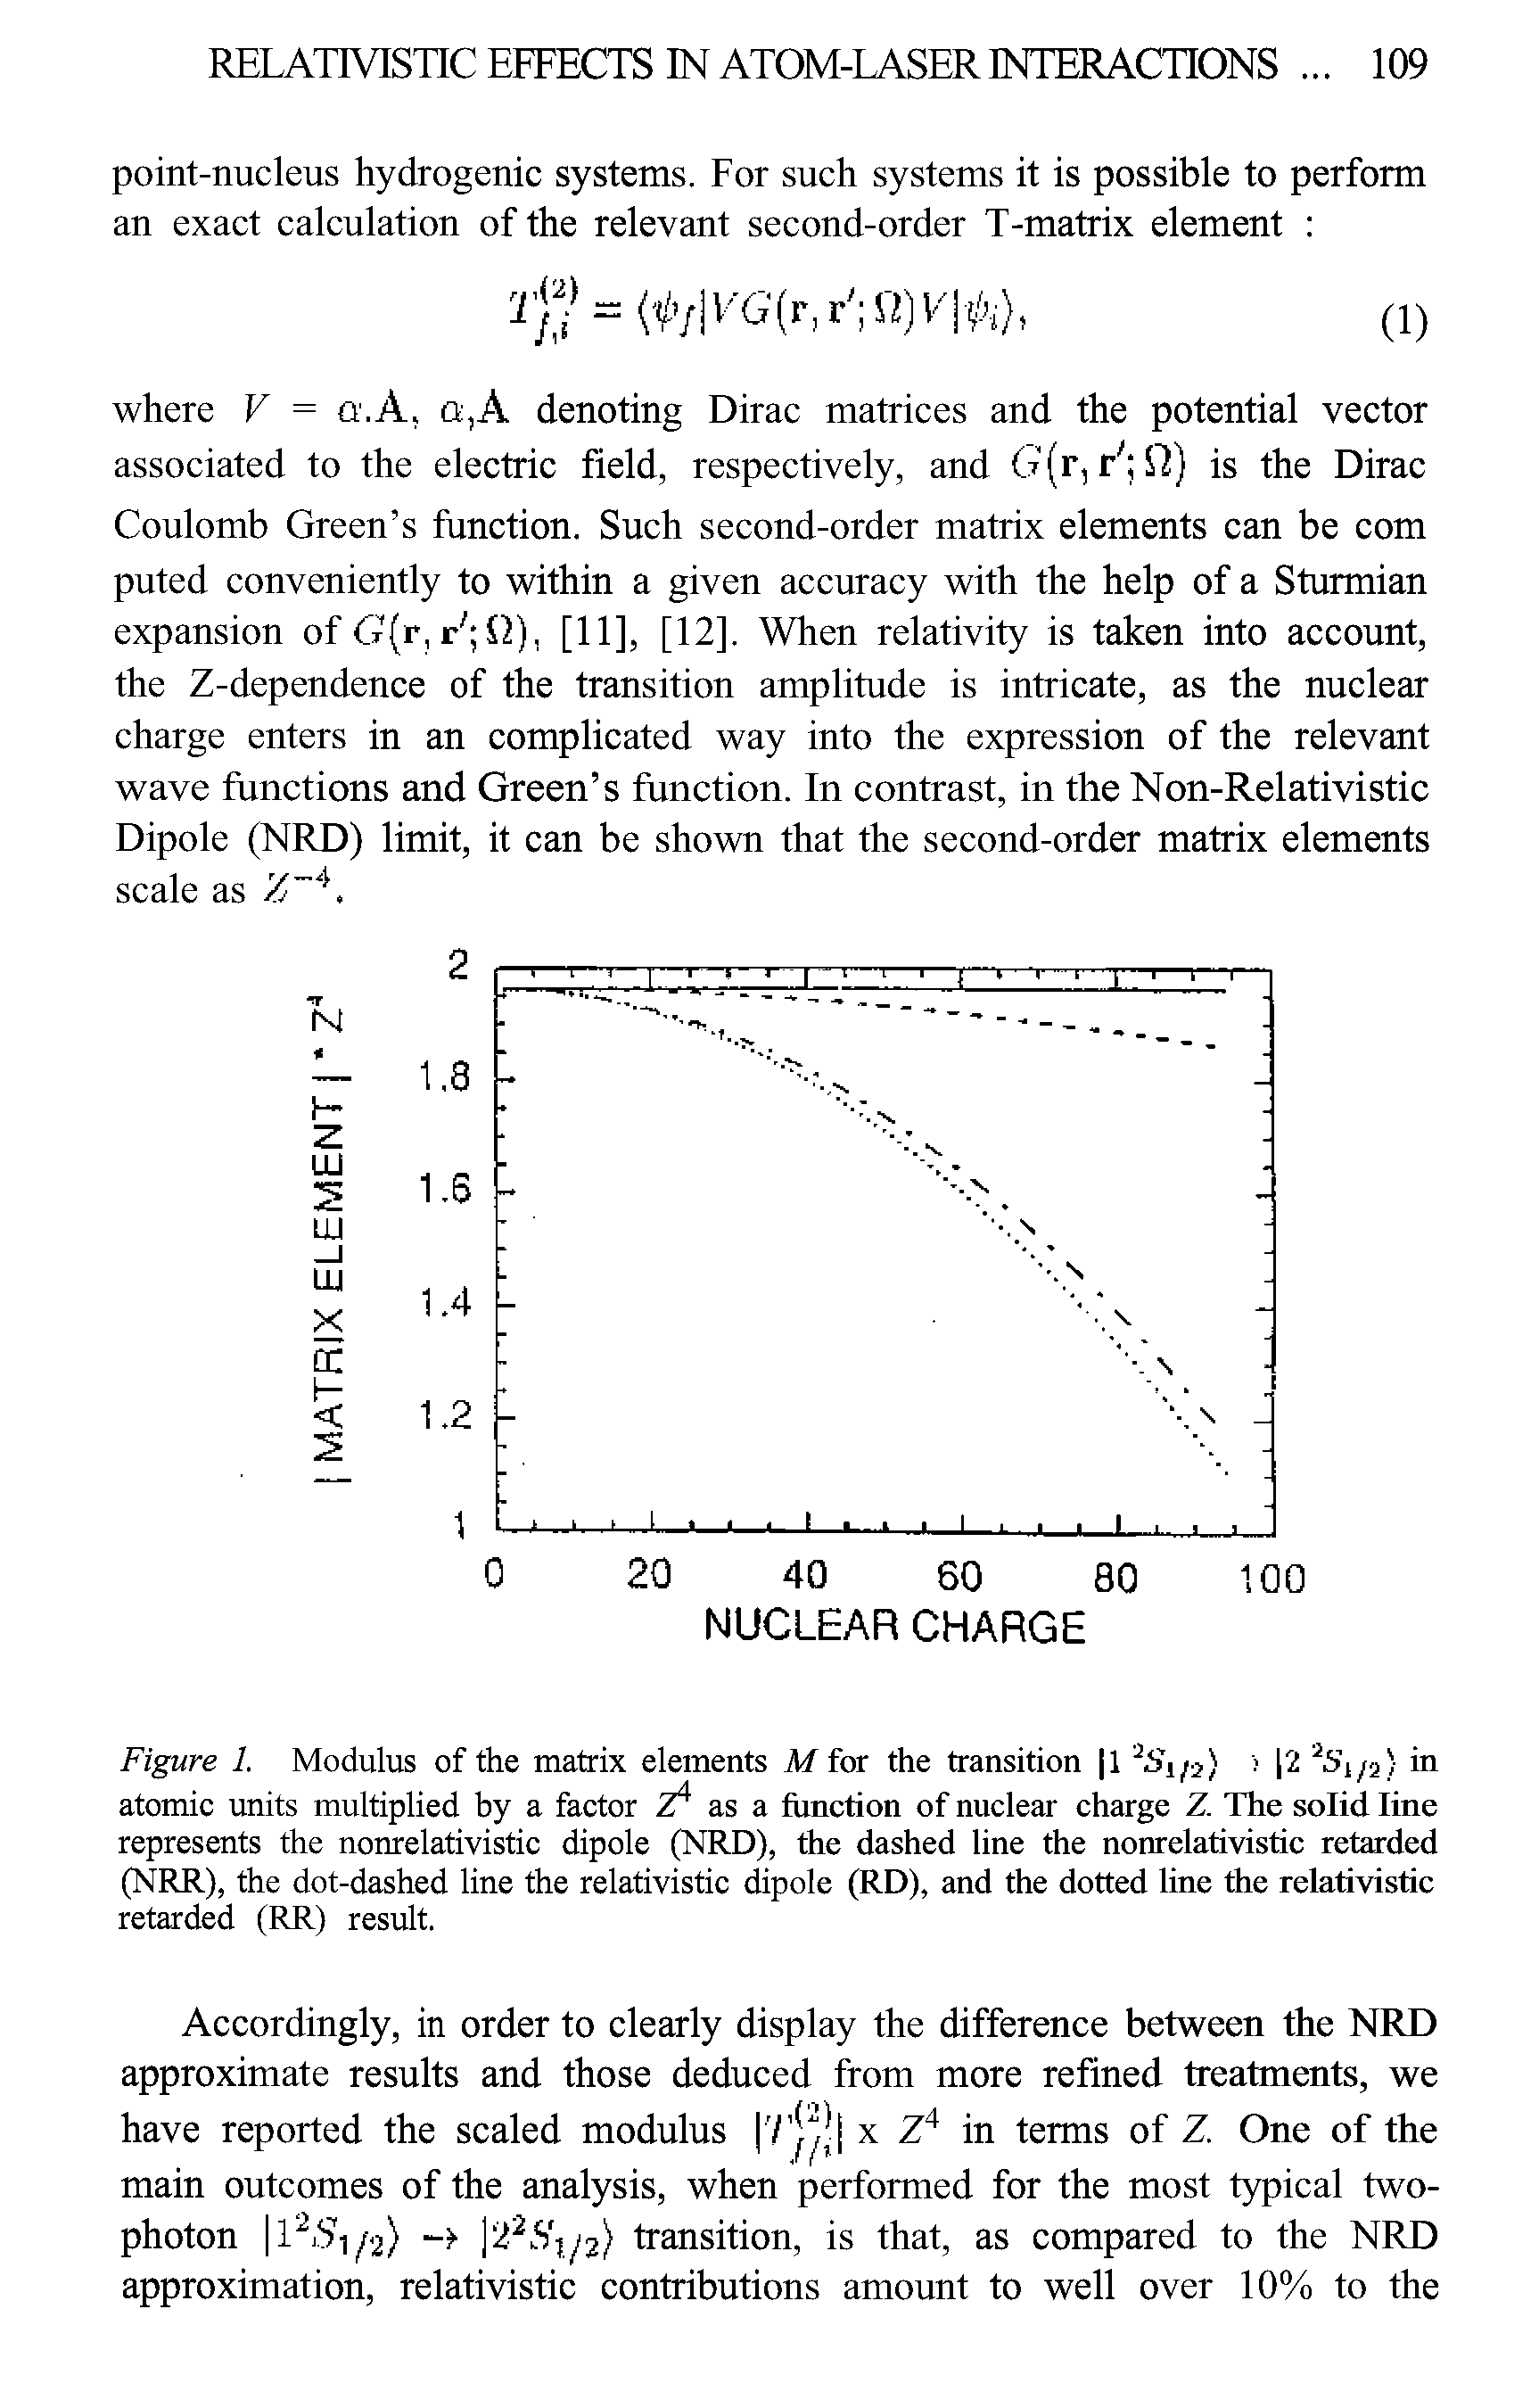 Figure 1. Modulus of the matrix elements M for the transition 11 25 1/s) 22Si/a in atomic units multiplied by a factor Z4 as a function of nuclear charge Z. The solid line represents the nonrelativistic dipole (NRD), the dashed line the nonrelativistic retarded (NRR), the dot-dashed line the relativistic dipole (RD), and the dotted line the relativistic retarded (RR) result.